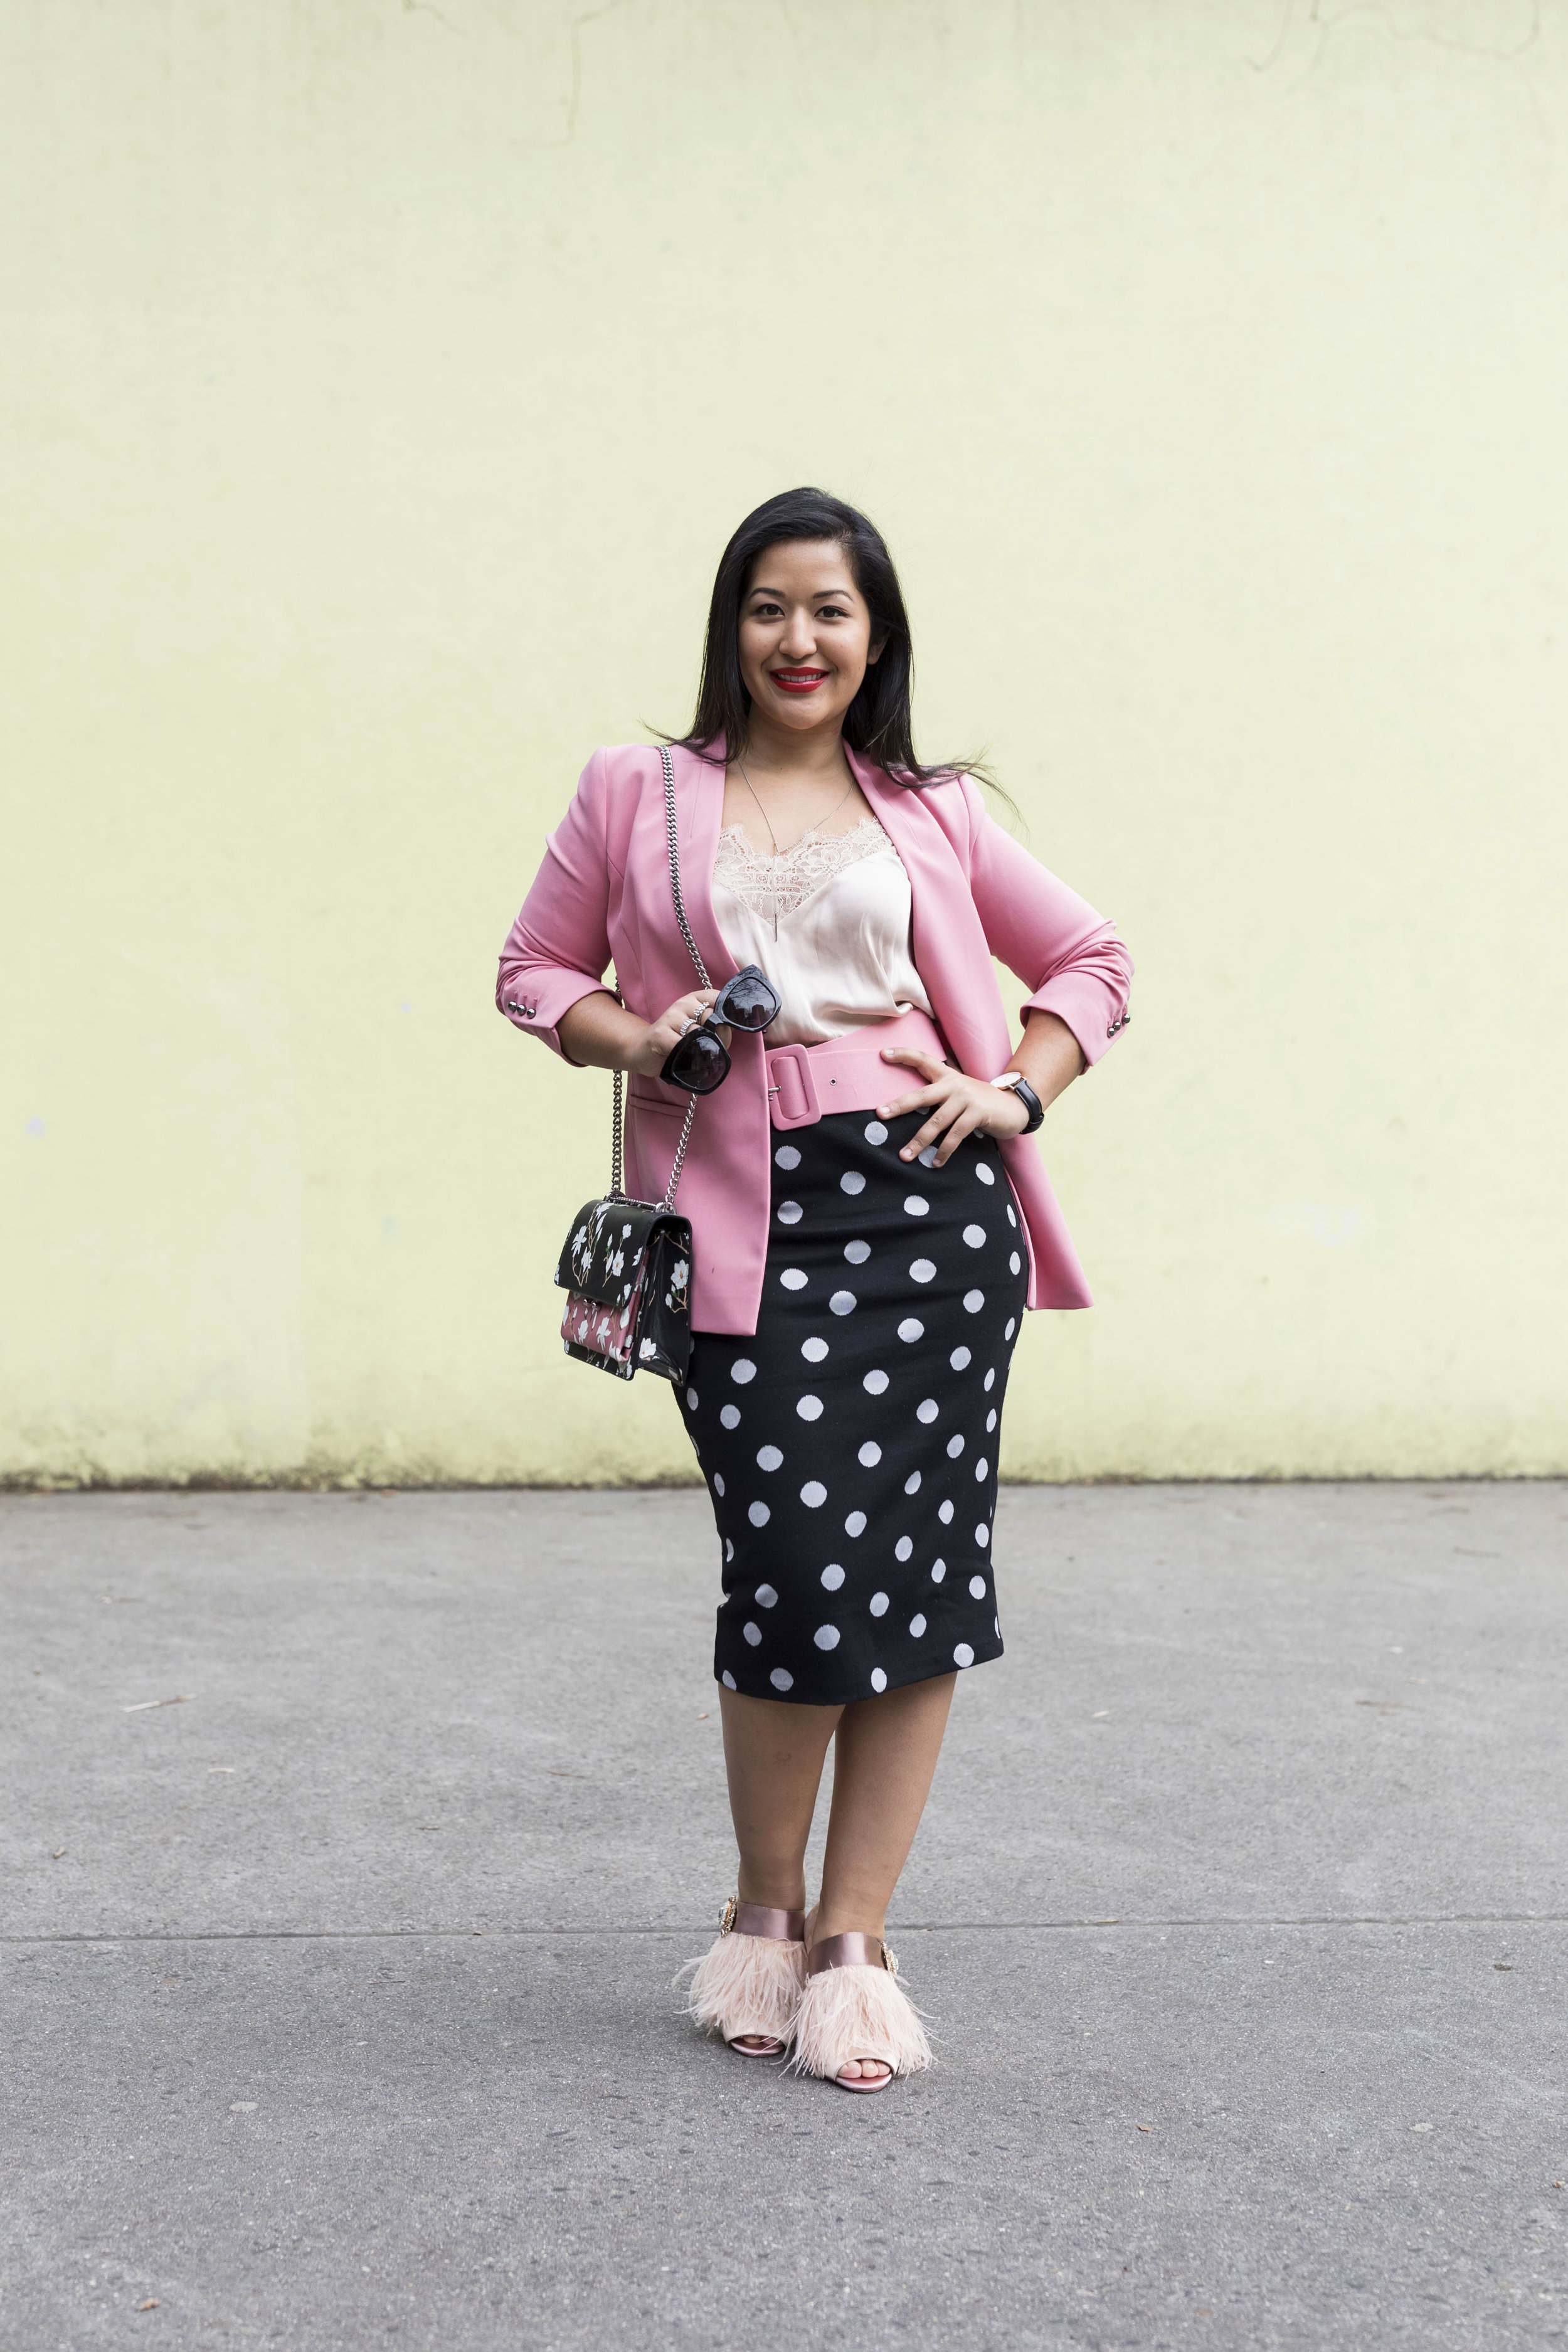 Krity S x Polka Dot and Pink Work Outfit4.jpg